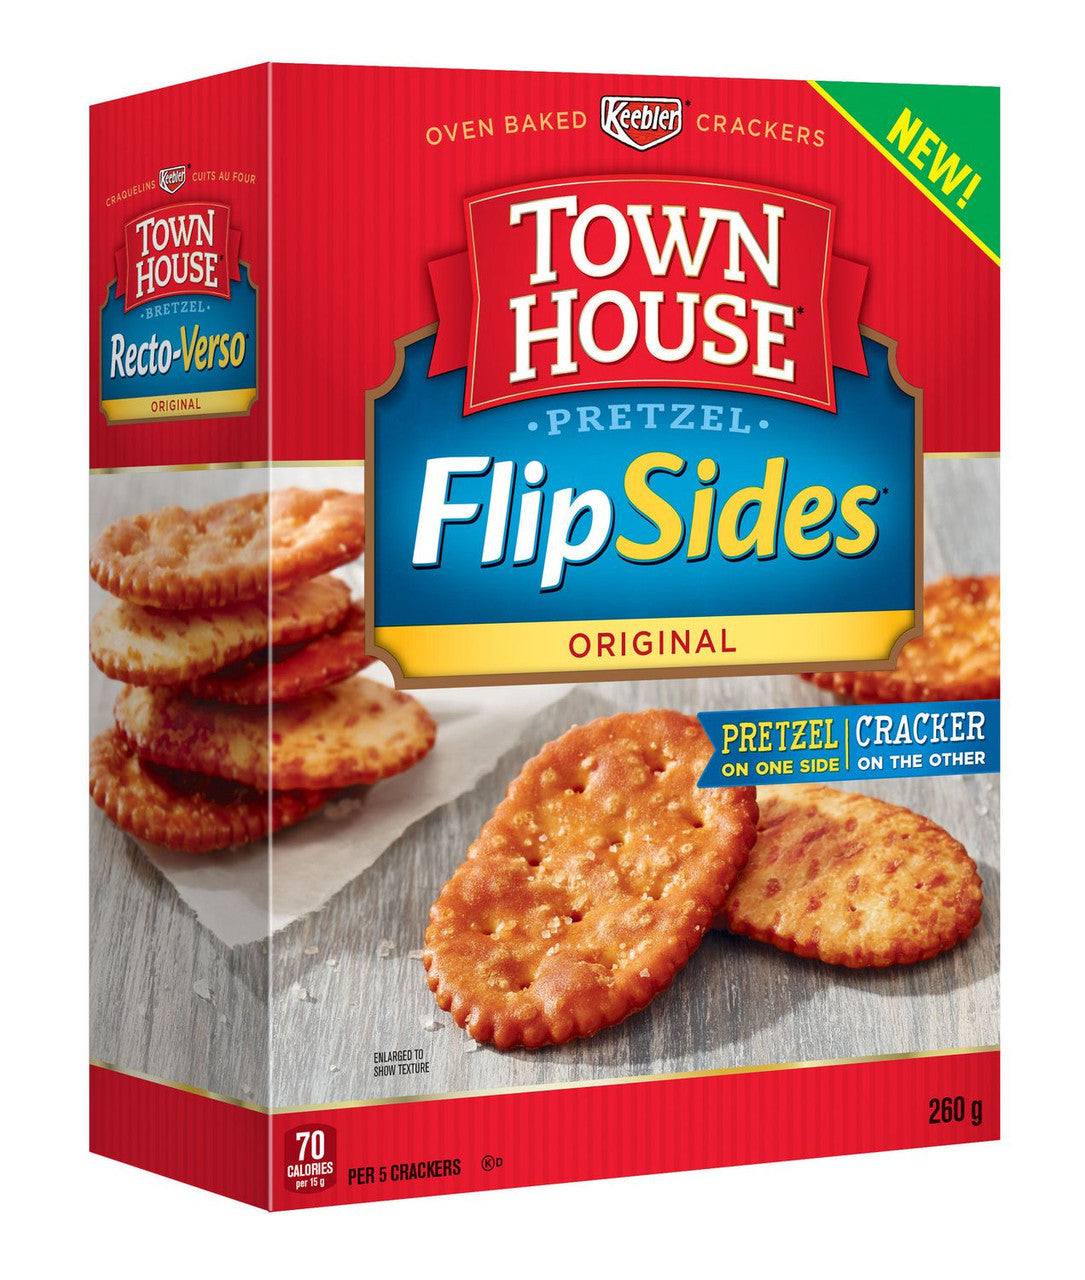 Keebler Town House Flipsides Original Crackers, 260g/9.2 oz., {Imported from Canada}